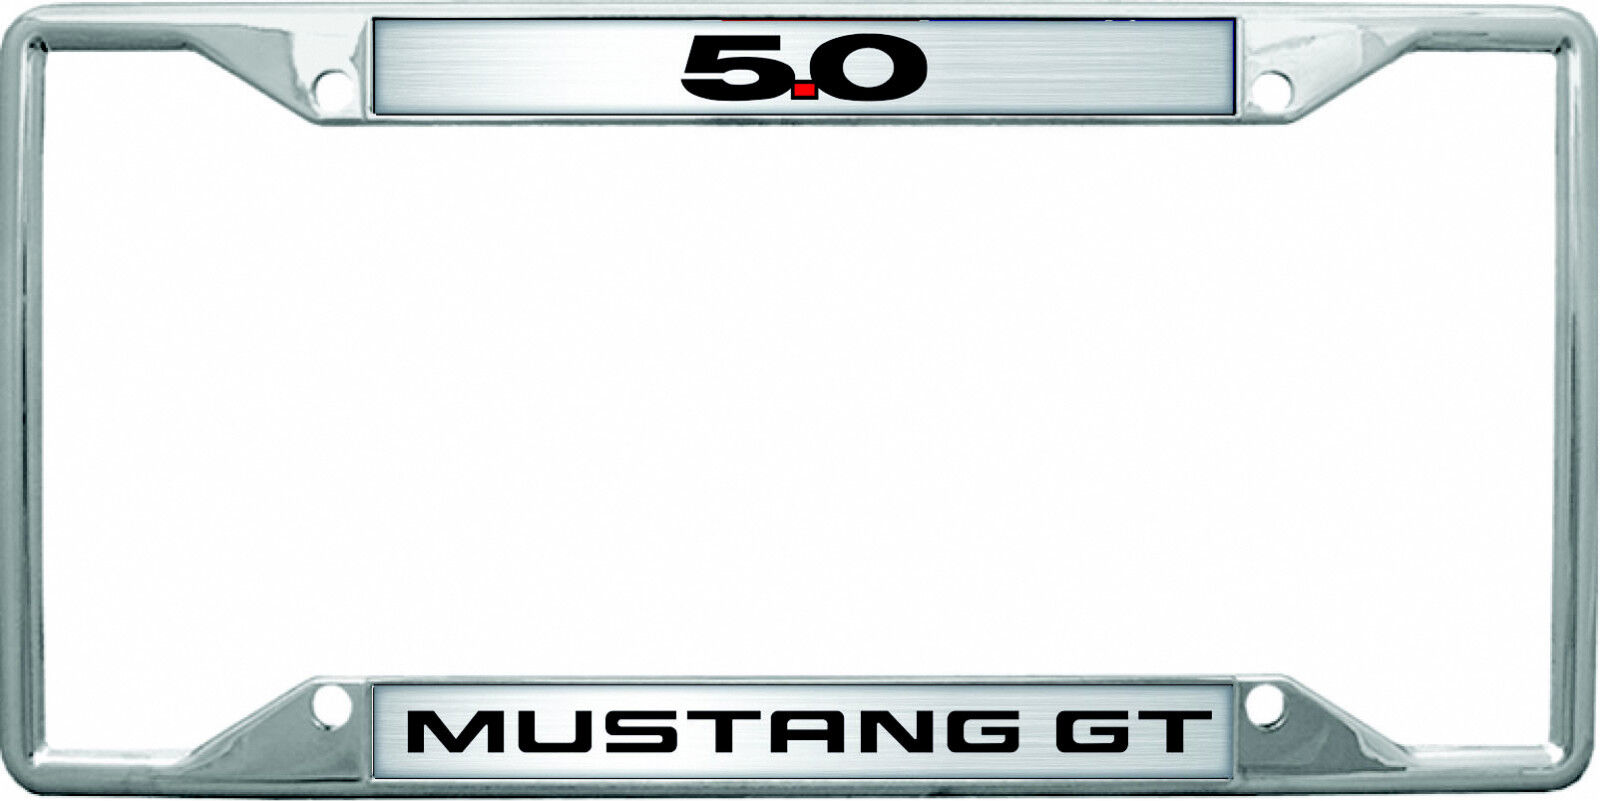 New Ford Mustang GT 5.0 License Plate Frame